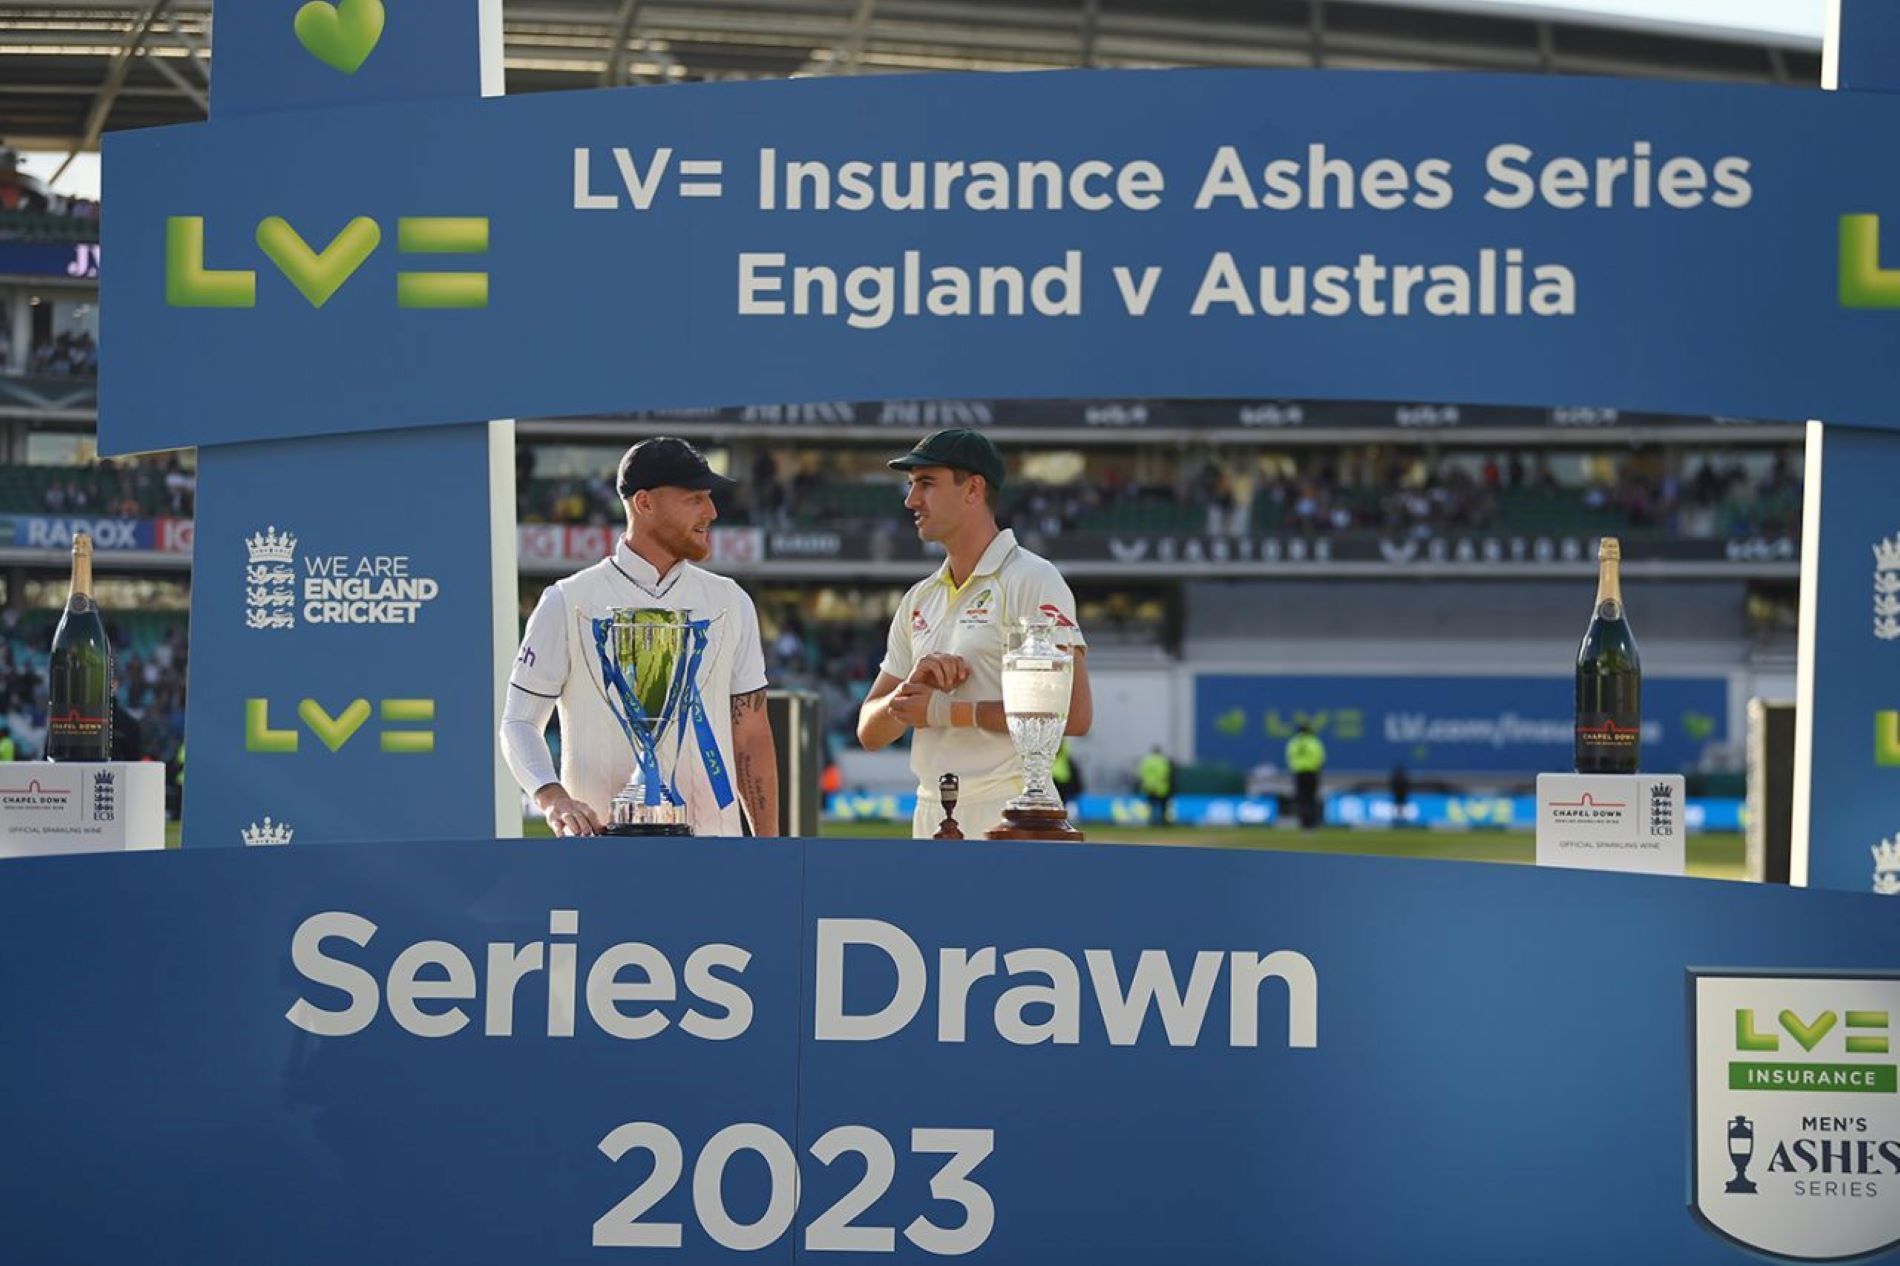 After five hard-fought games, the Ashes series culminated in a draw.